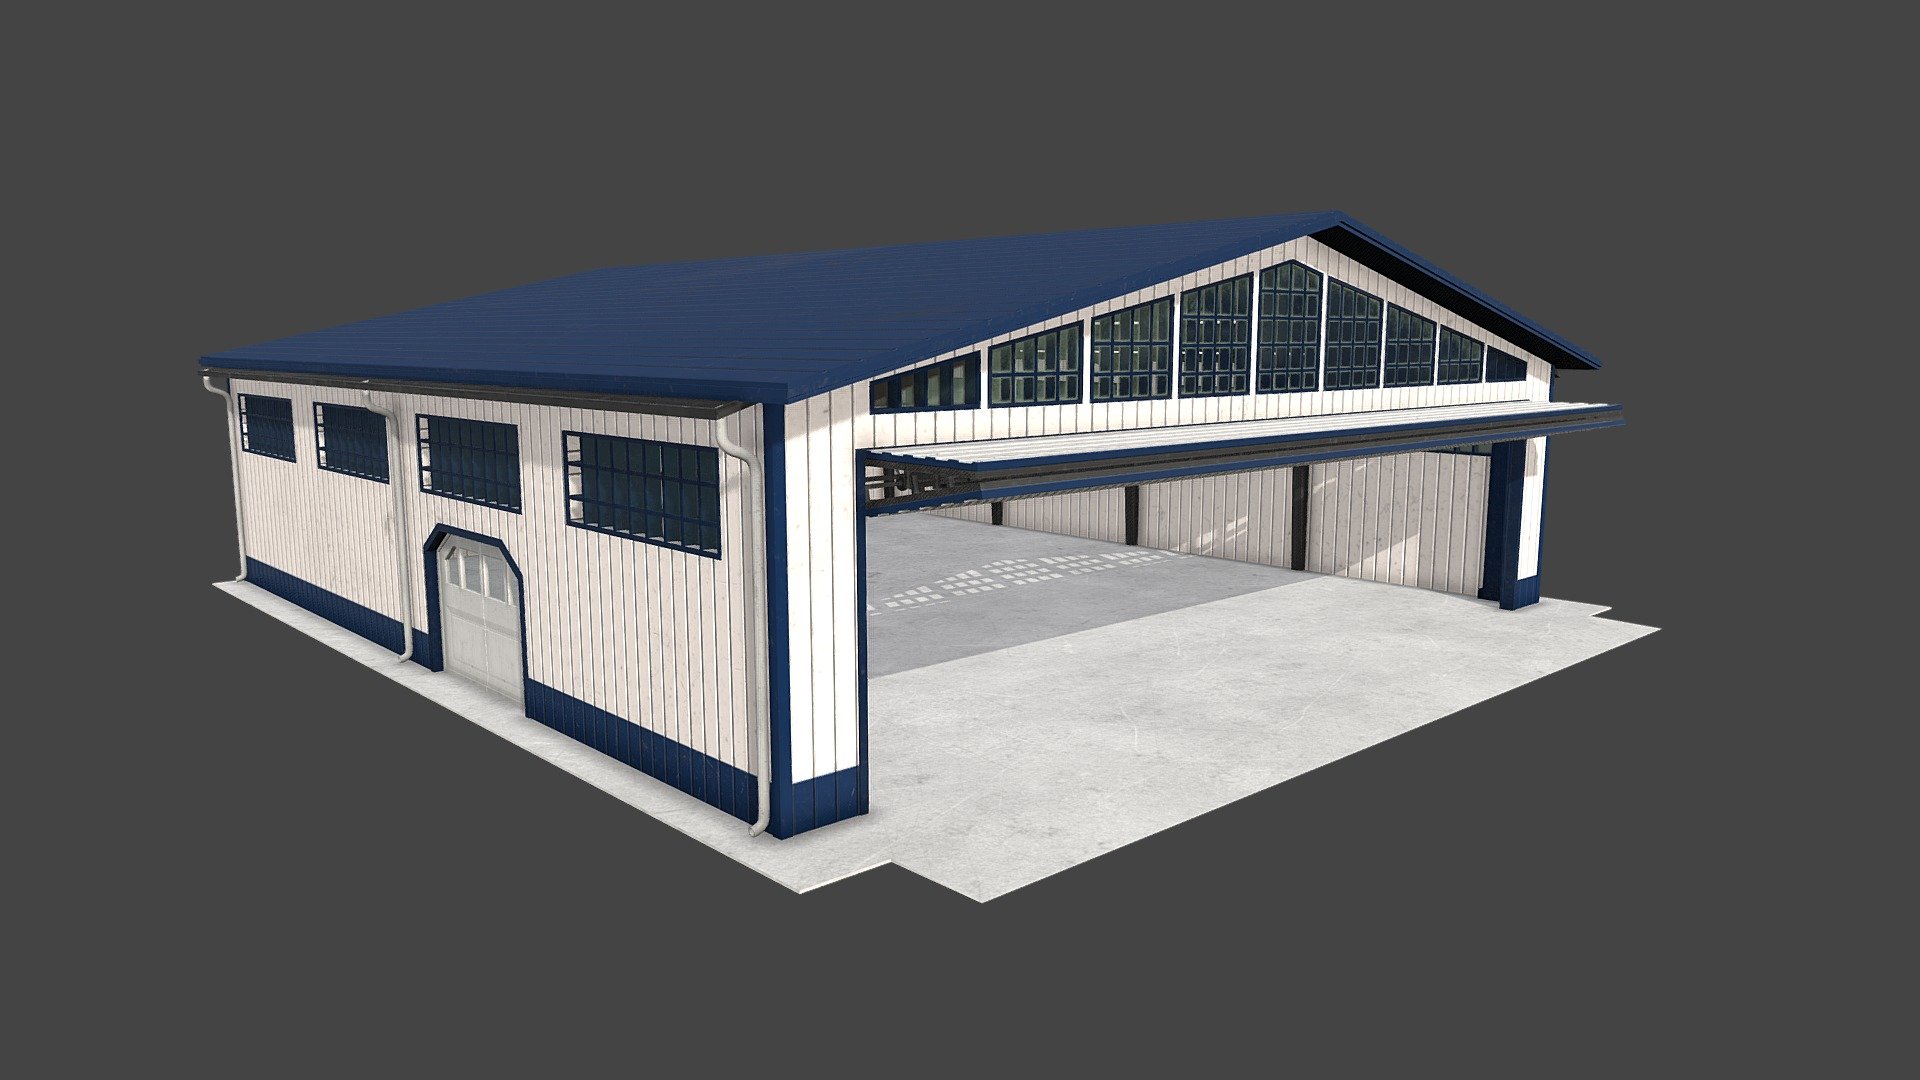 Features:




Low poly

Optimized

Game ready

Easy to modify

Door rigged to open and close easily with animation included

Separated and nomed parts

All formats tested and working

All Textures included and material applied

Textures MetalRough and SpecGloss 4096x4096
 - Garage - Hangar - Buy Royalty Free 3D model by Elvair Lima (@elvair) 3d model